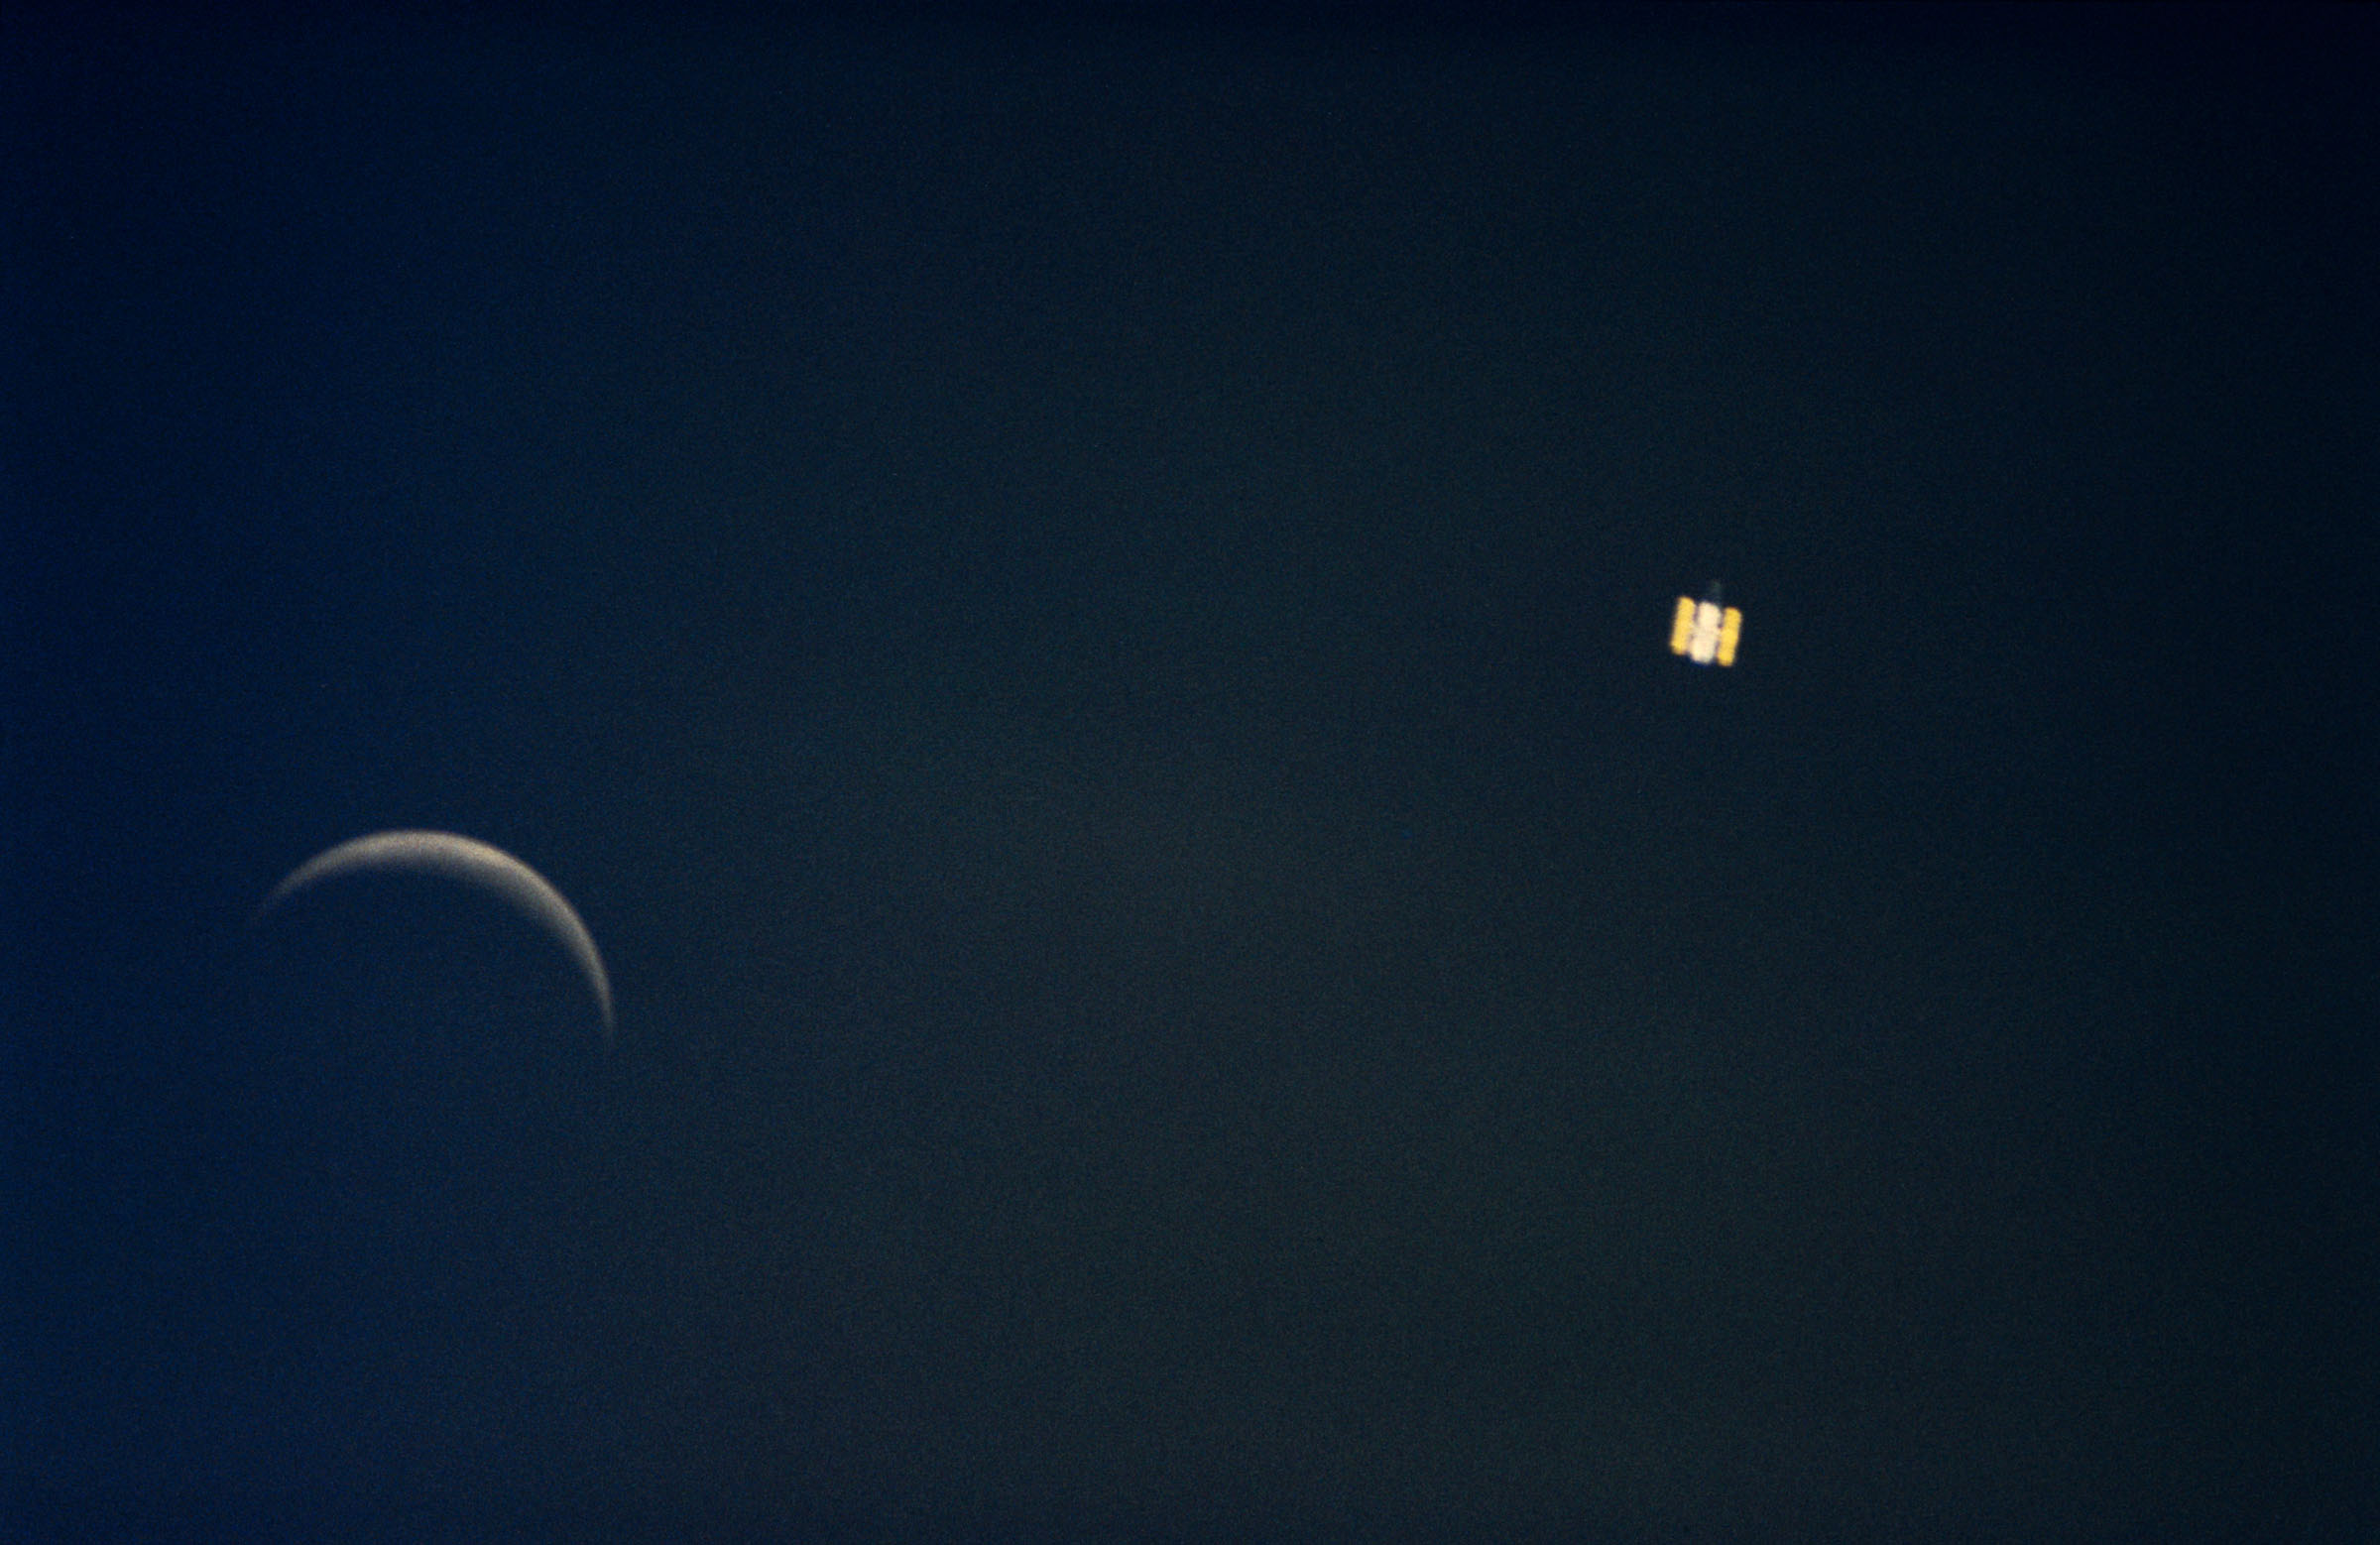 A distant view of Hubble, right, with a crescent Moon